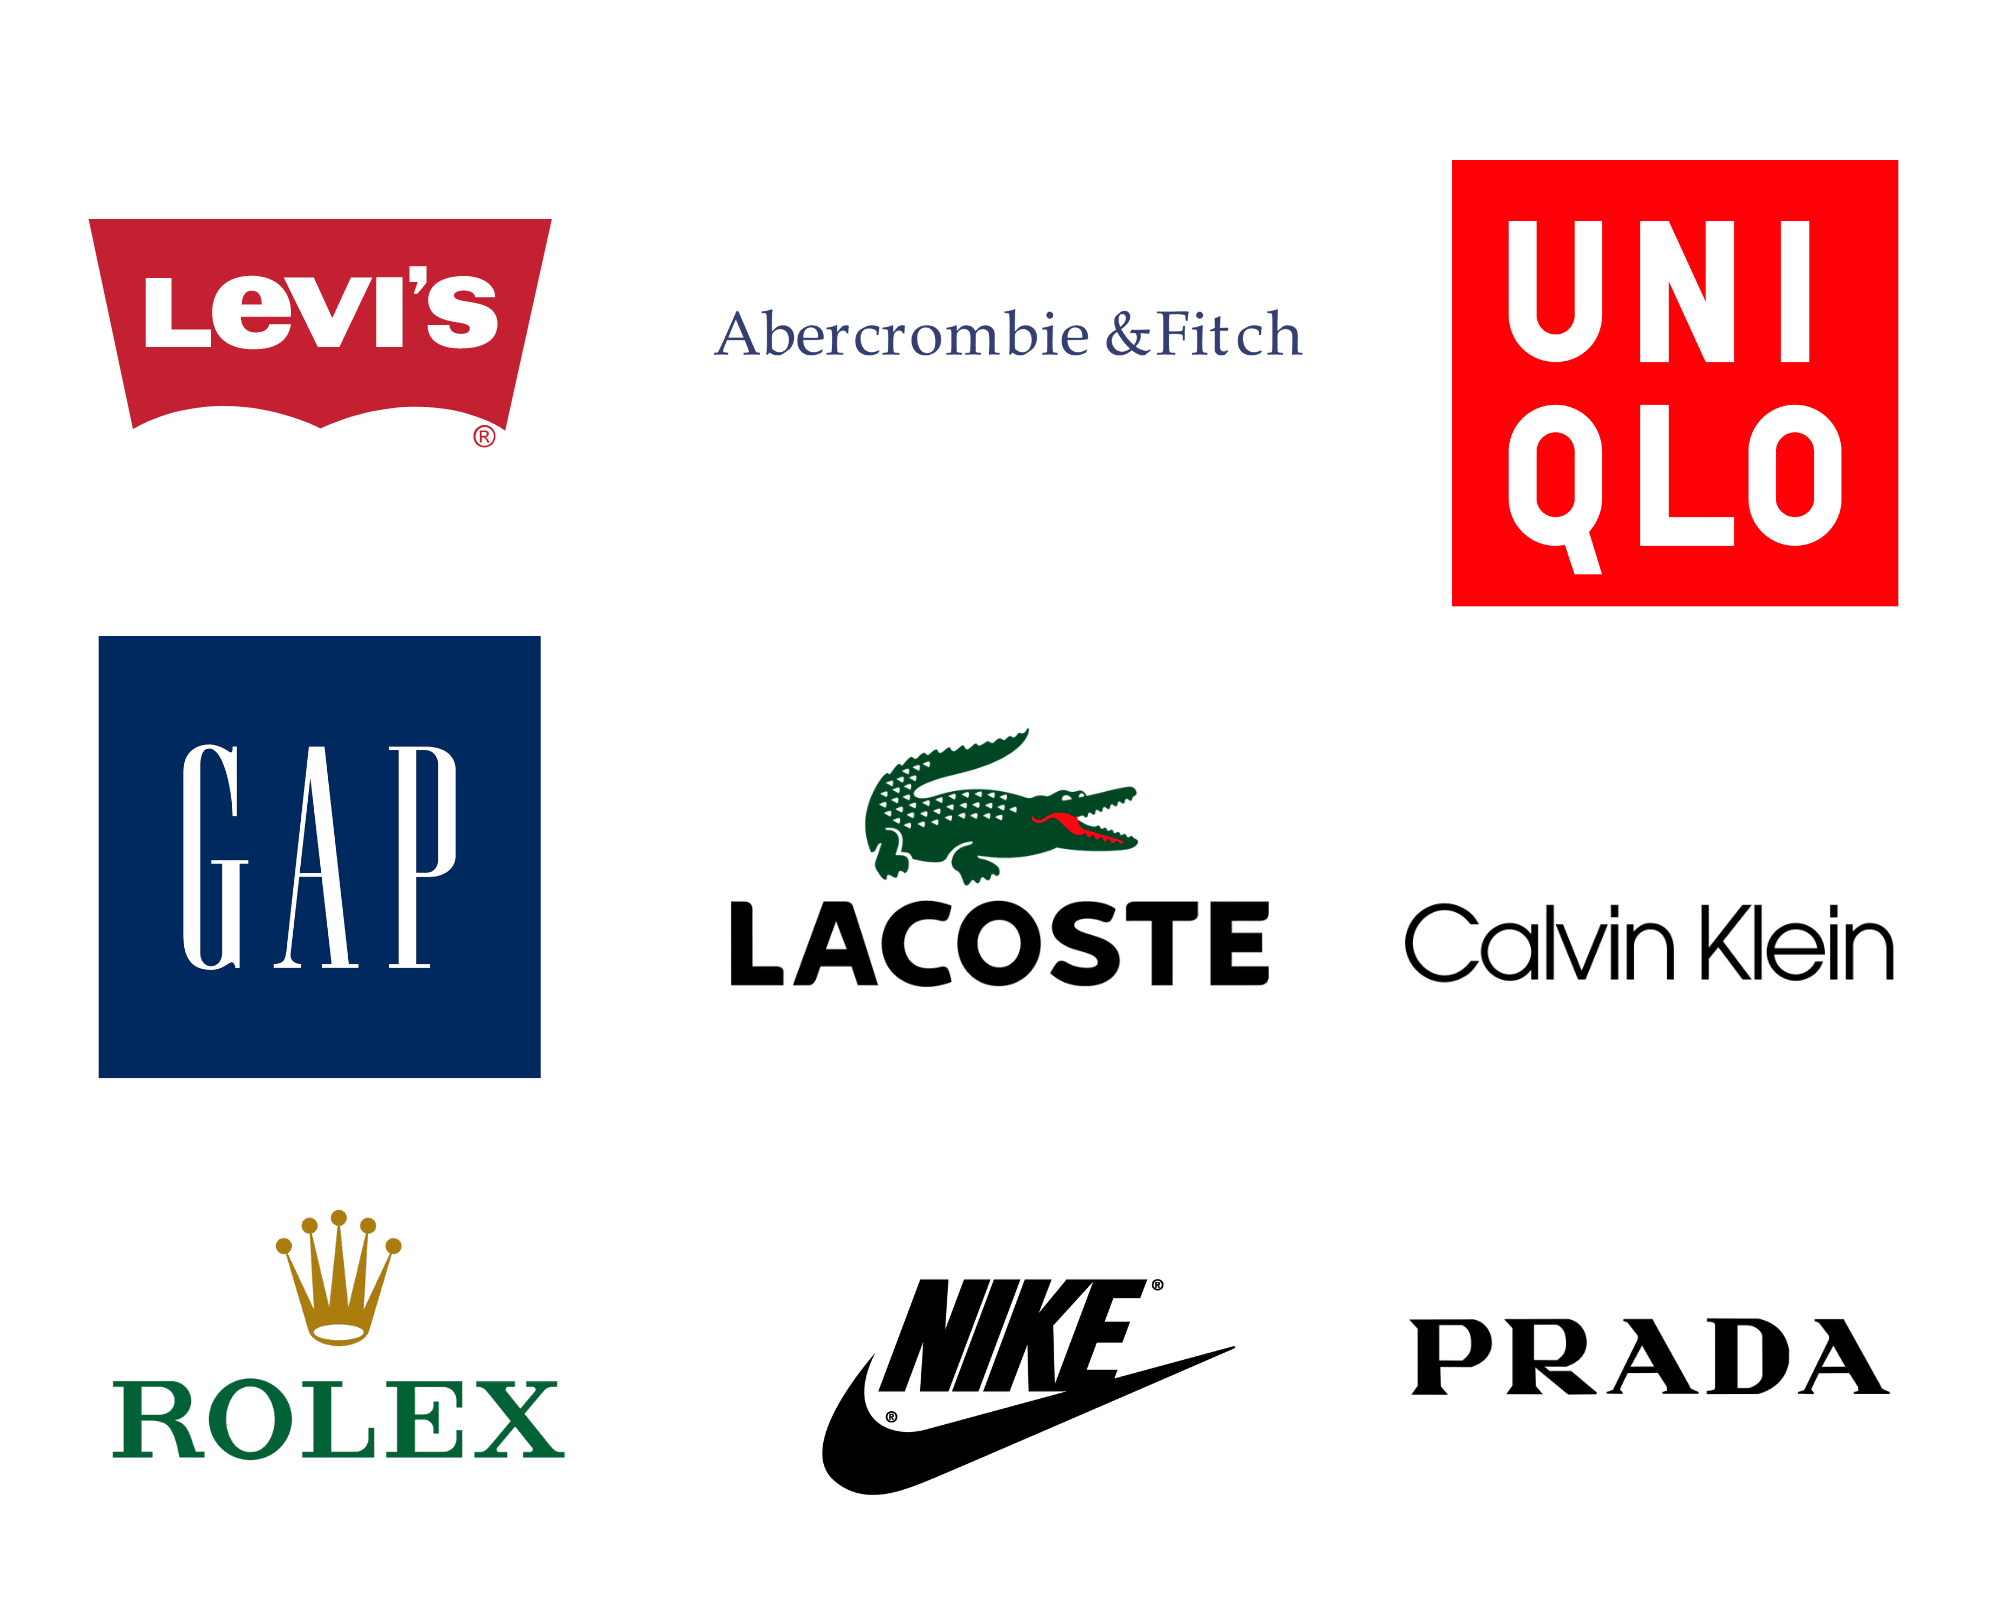 The best fashion logos, according to the experts